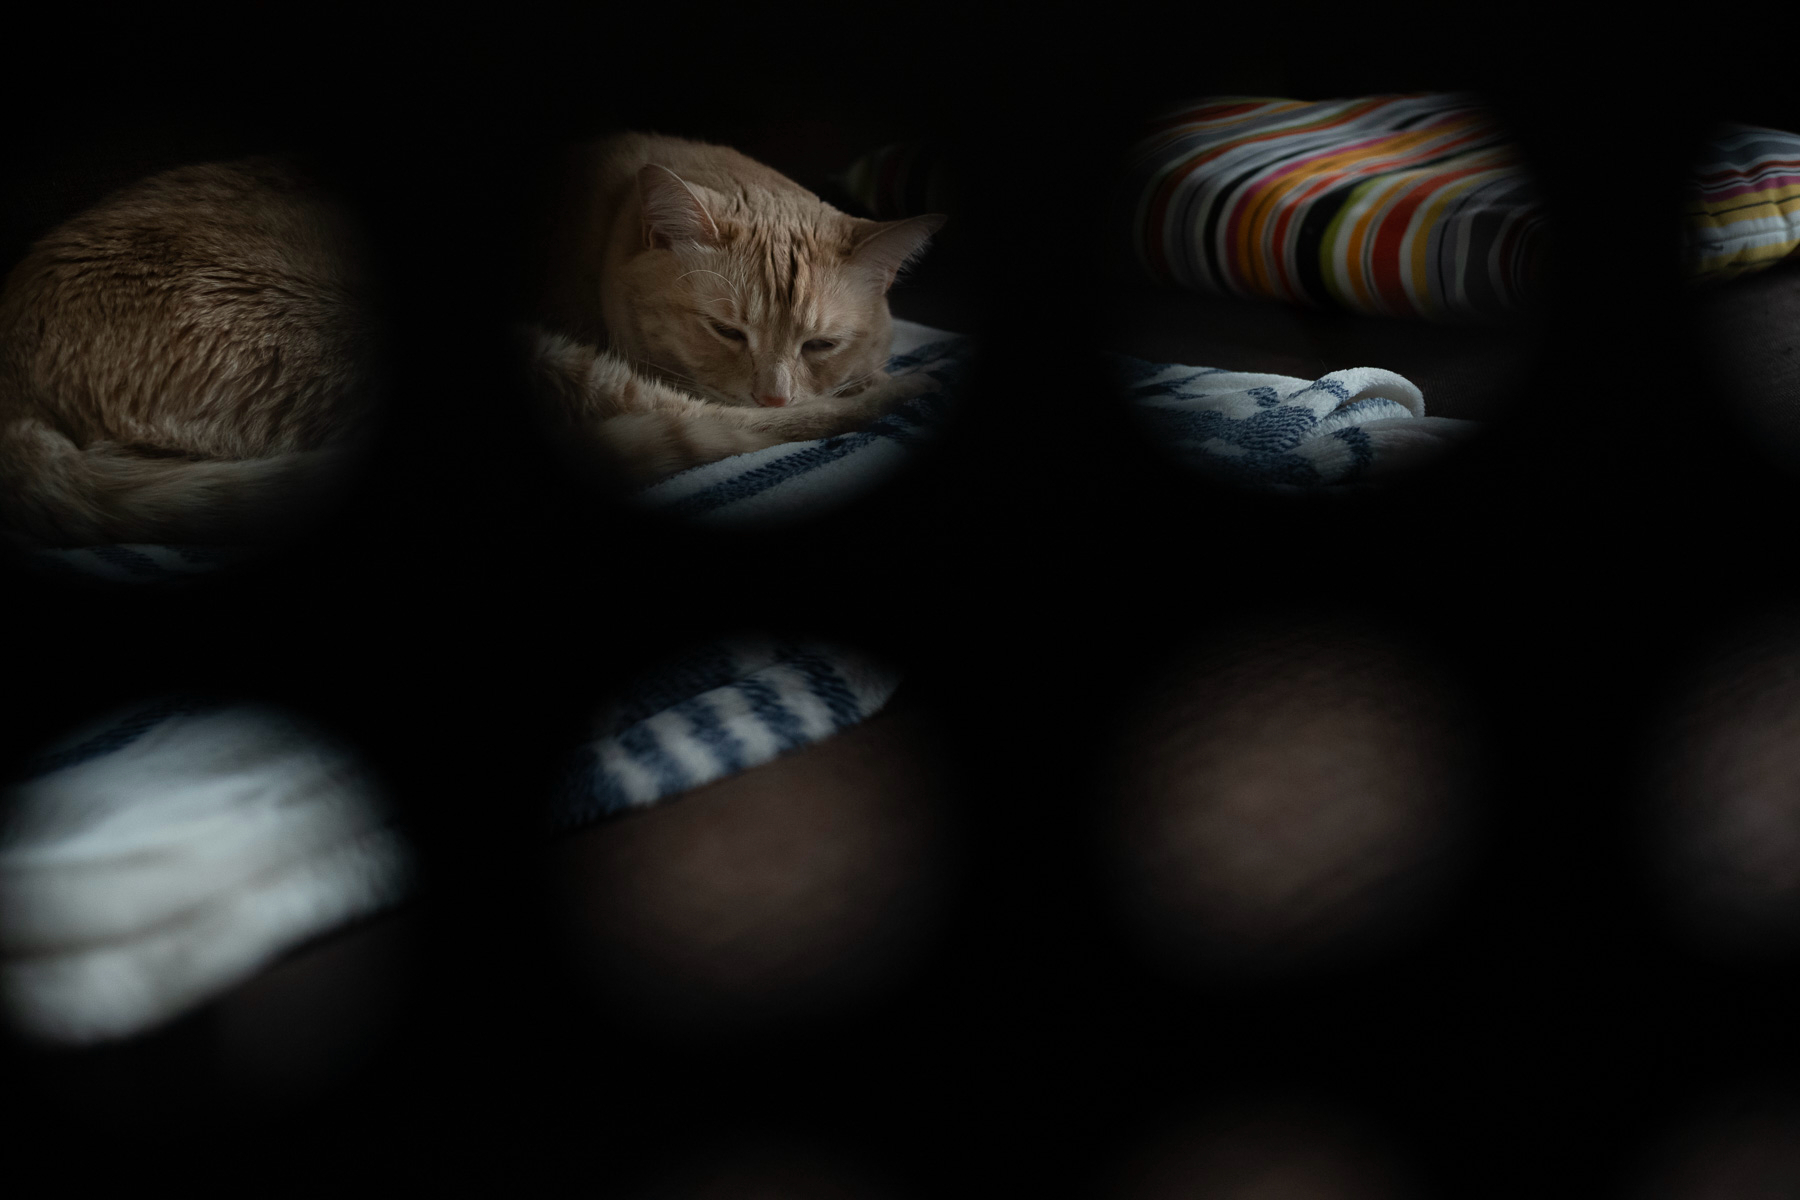 A tabby cat resting on a patterned blanket with patches of light filtering through an object with circular cut-outs, casting a pattern of shadows over the scene.